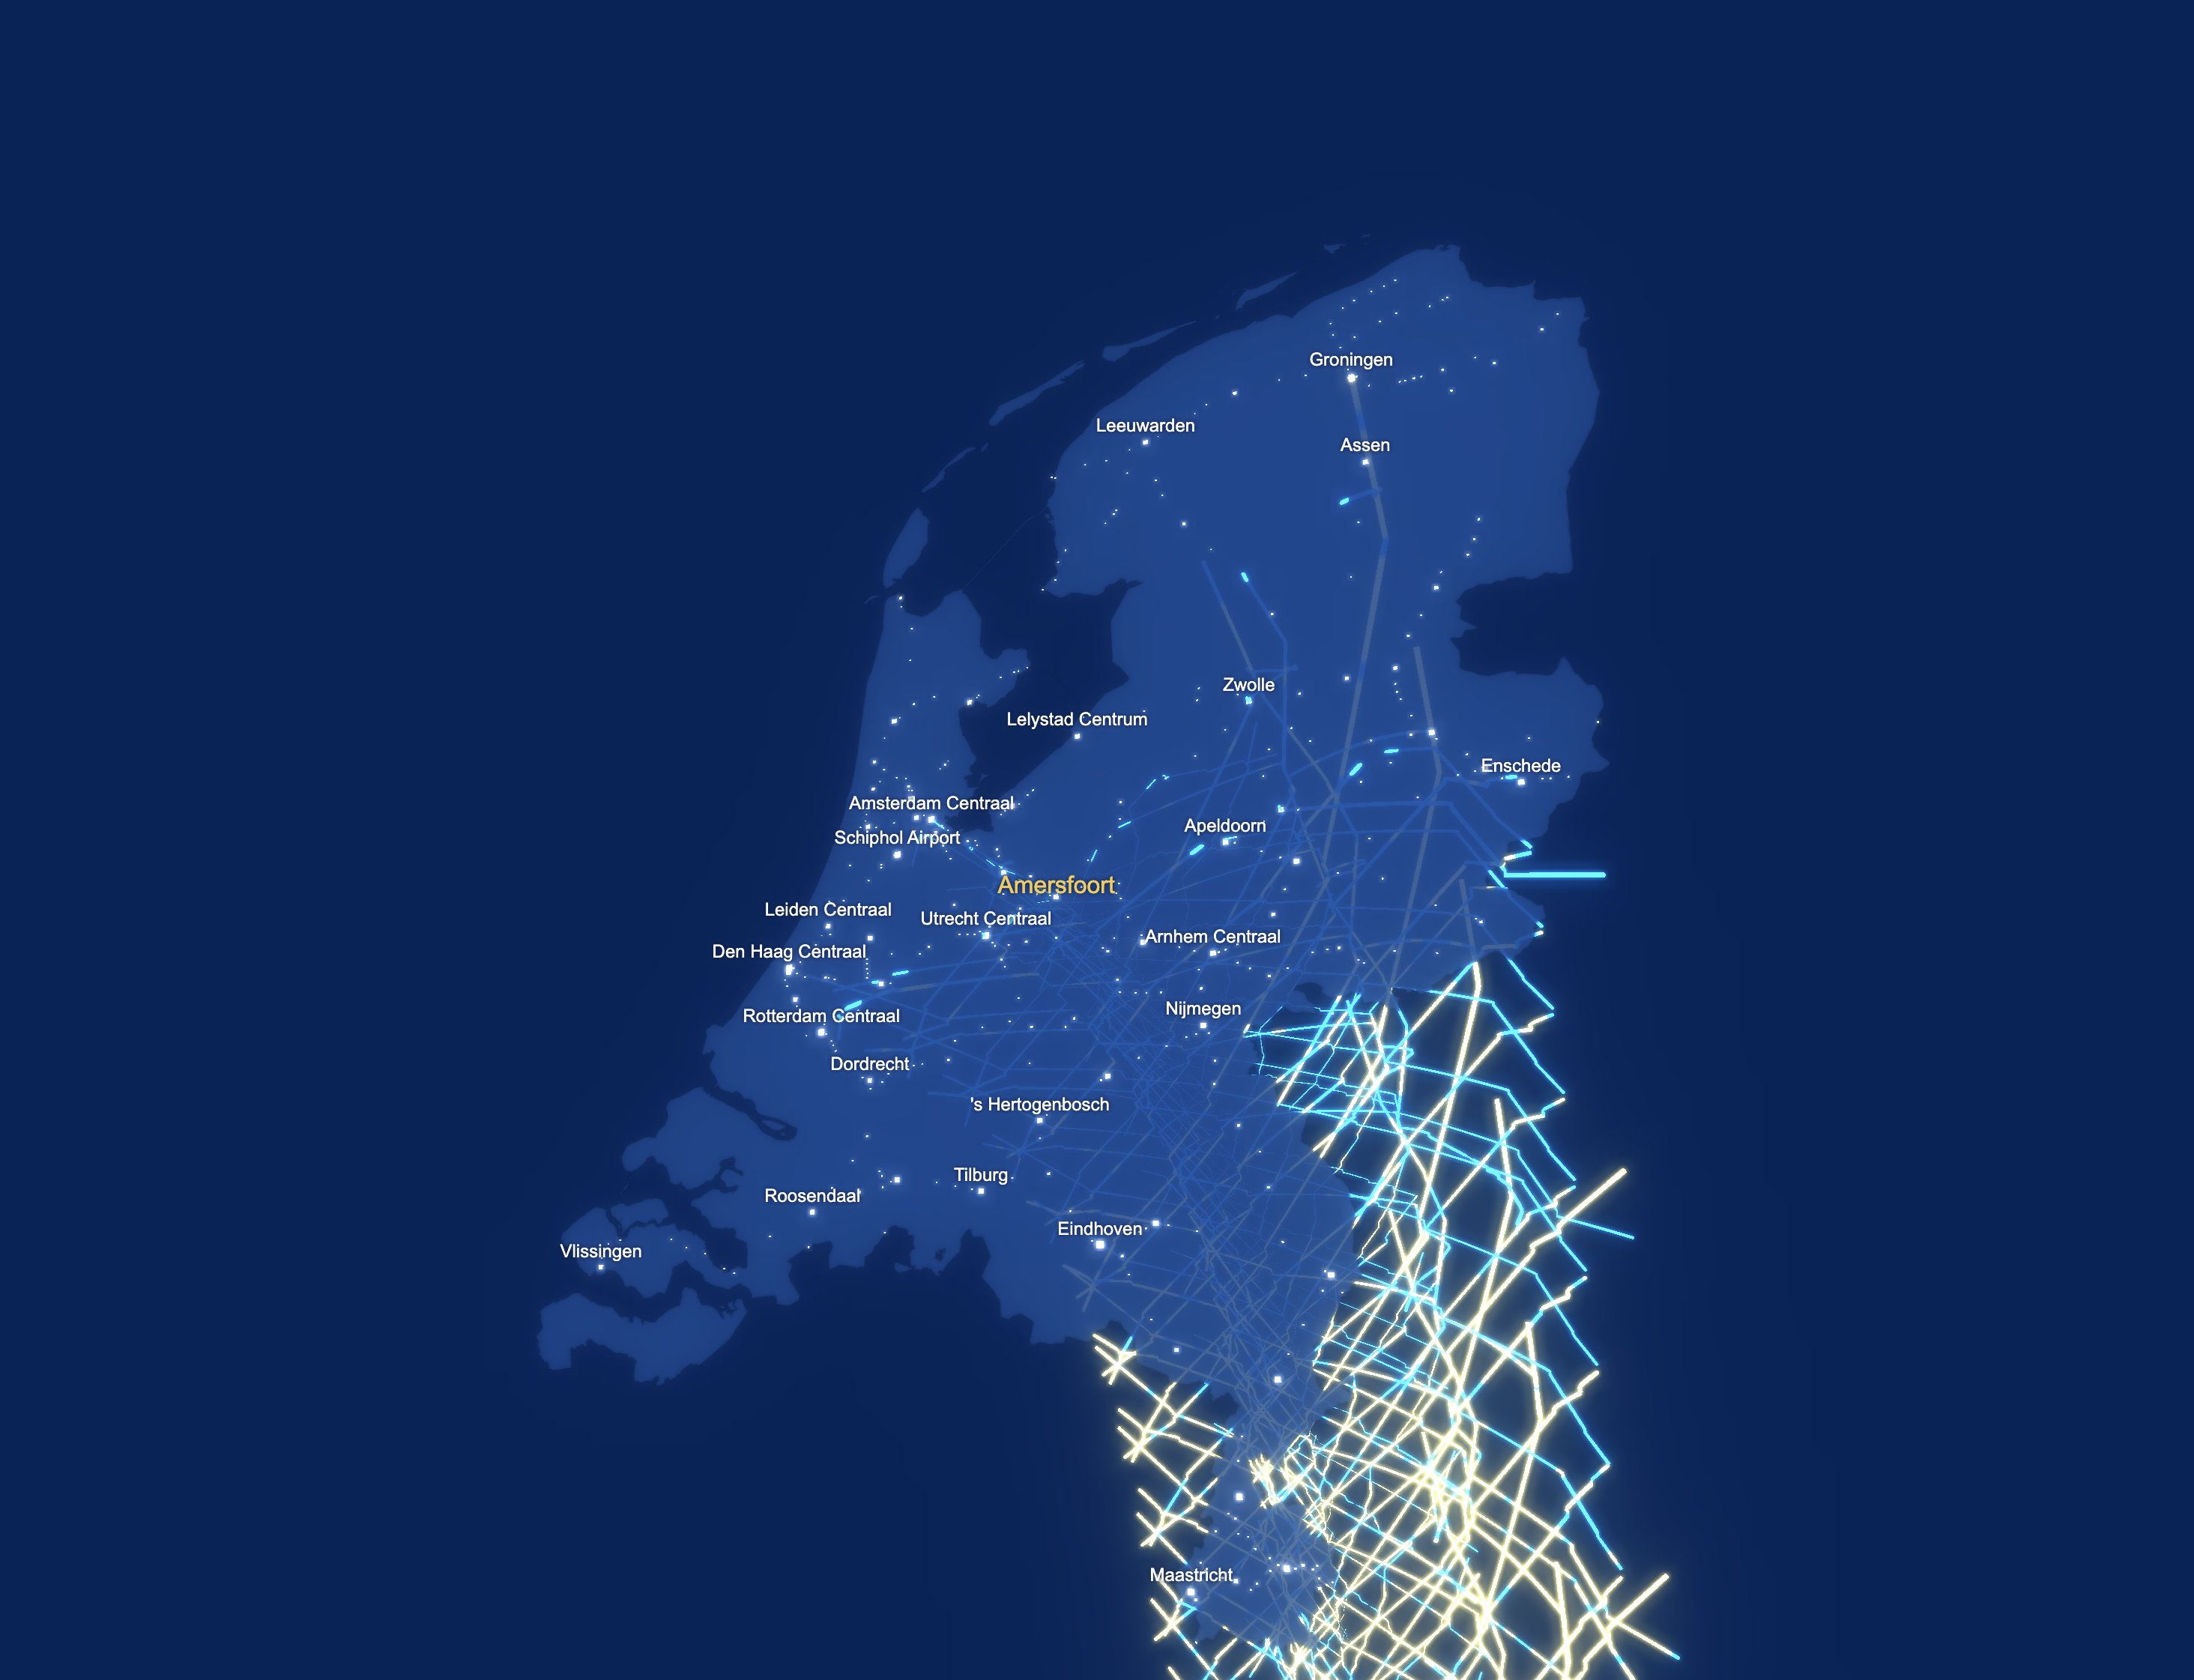 Train traffic in The Netherlands